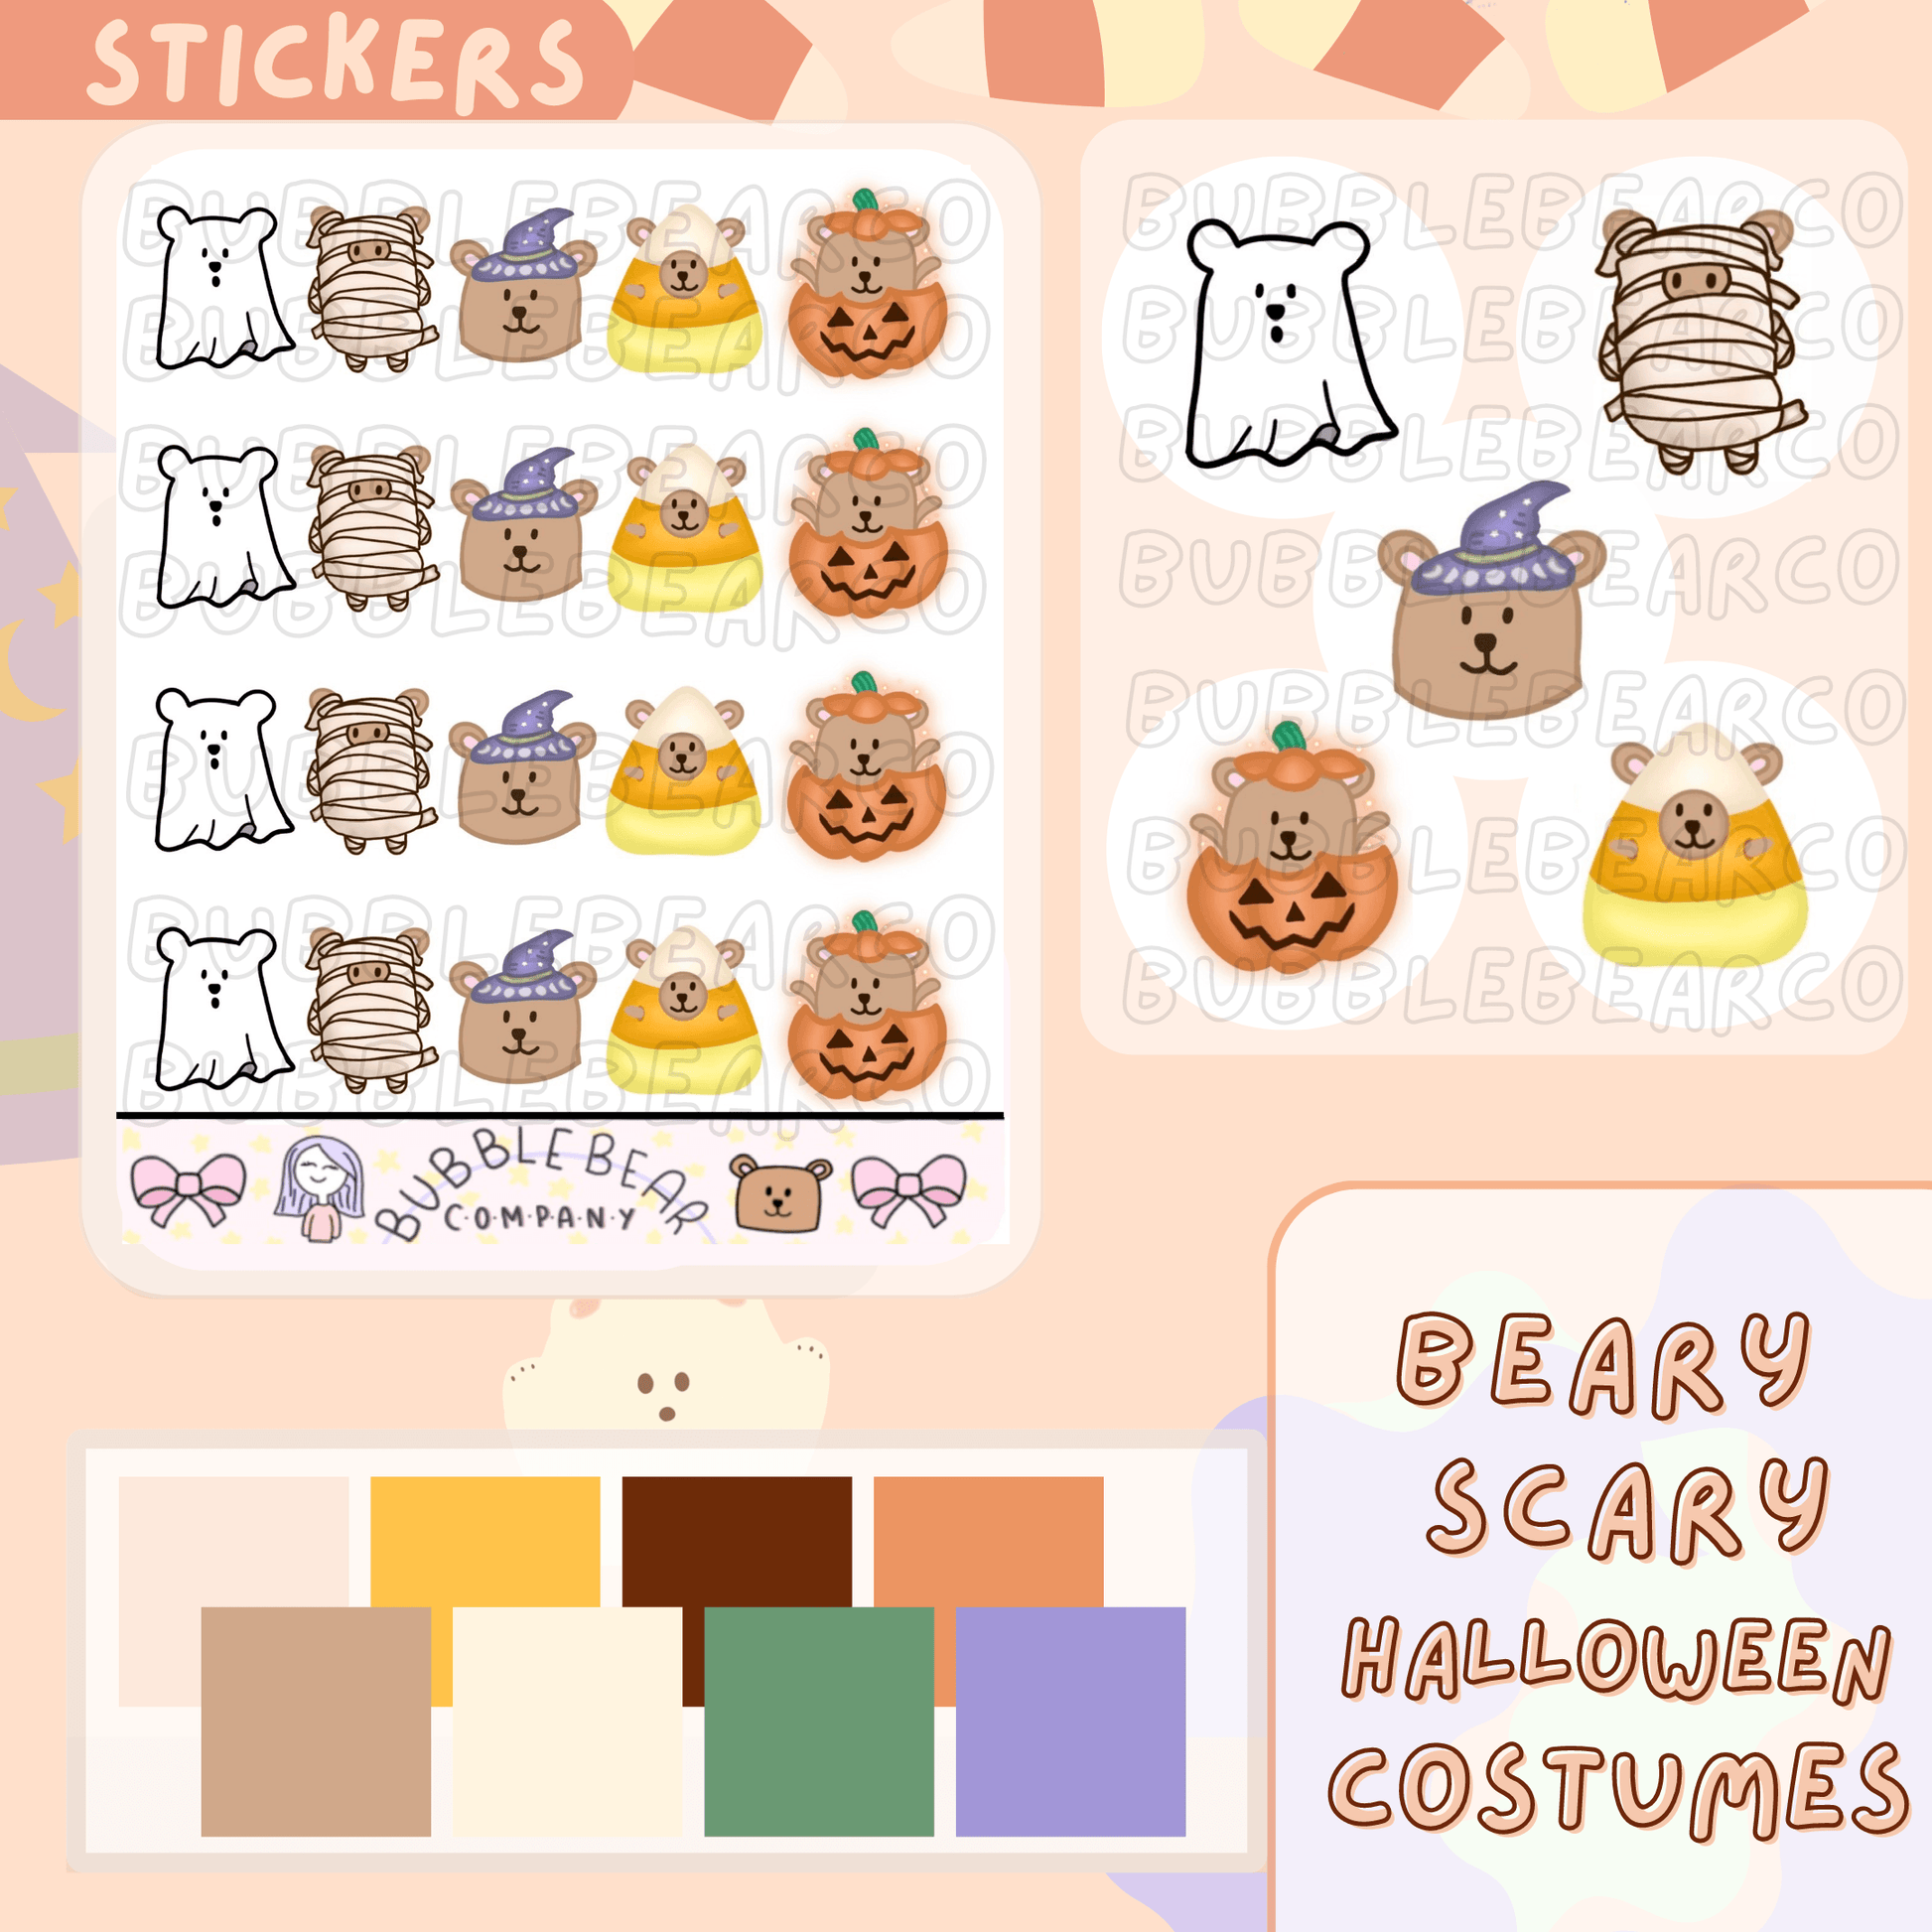 Beary Scary Halloween Costumes Stickers - Bubble Bear Co